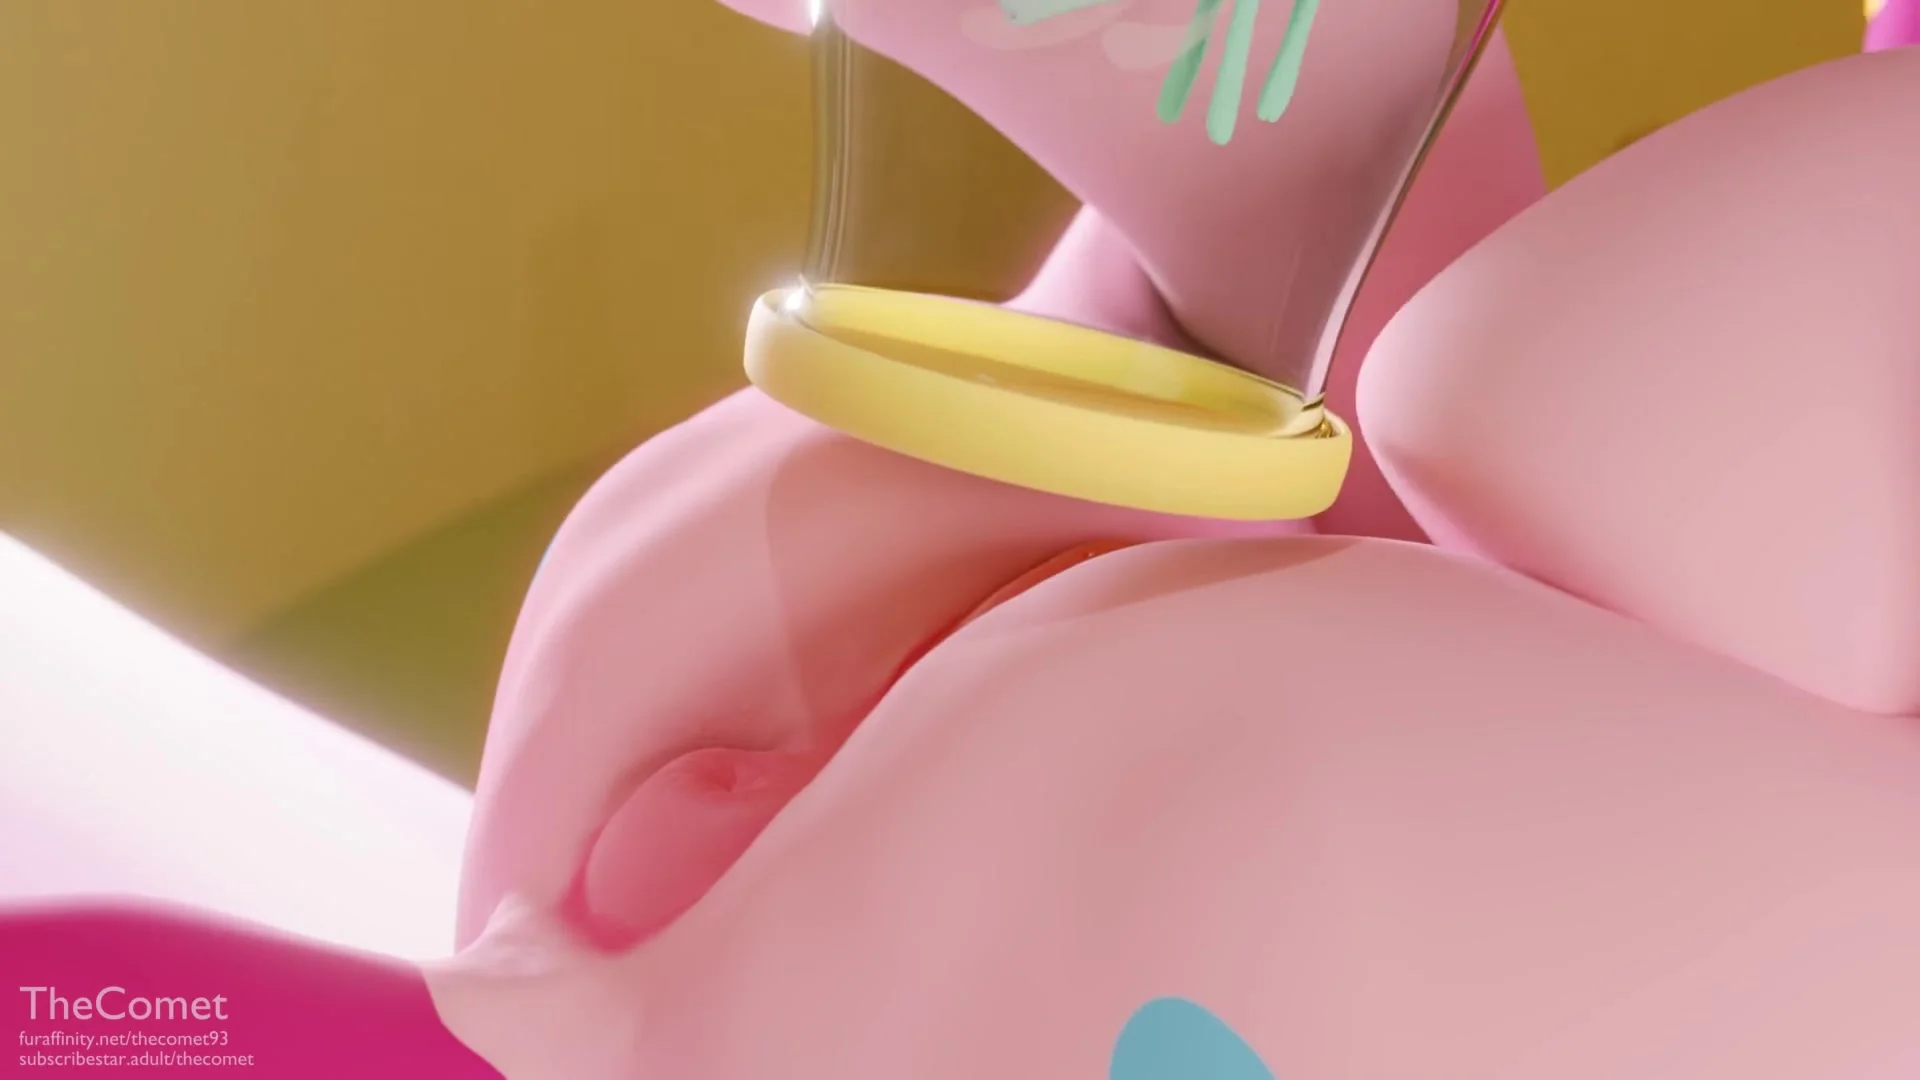 1920px x 1080px - Pinkie Pie farts on and anal vores a fairy - ThisVid.com